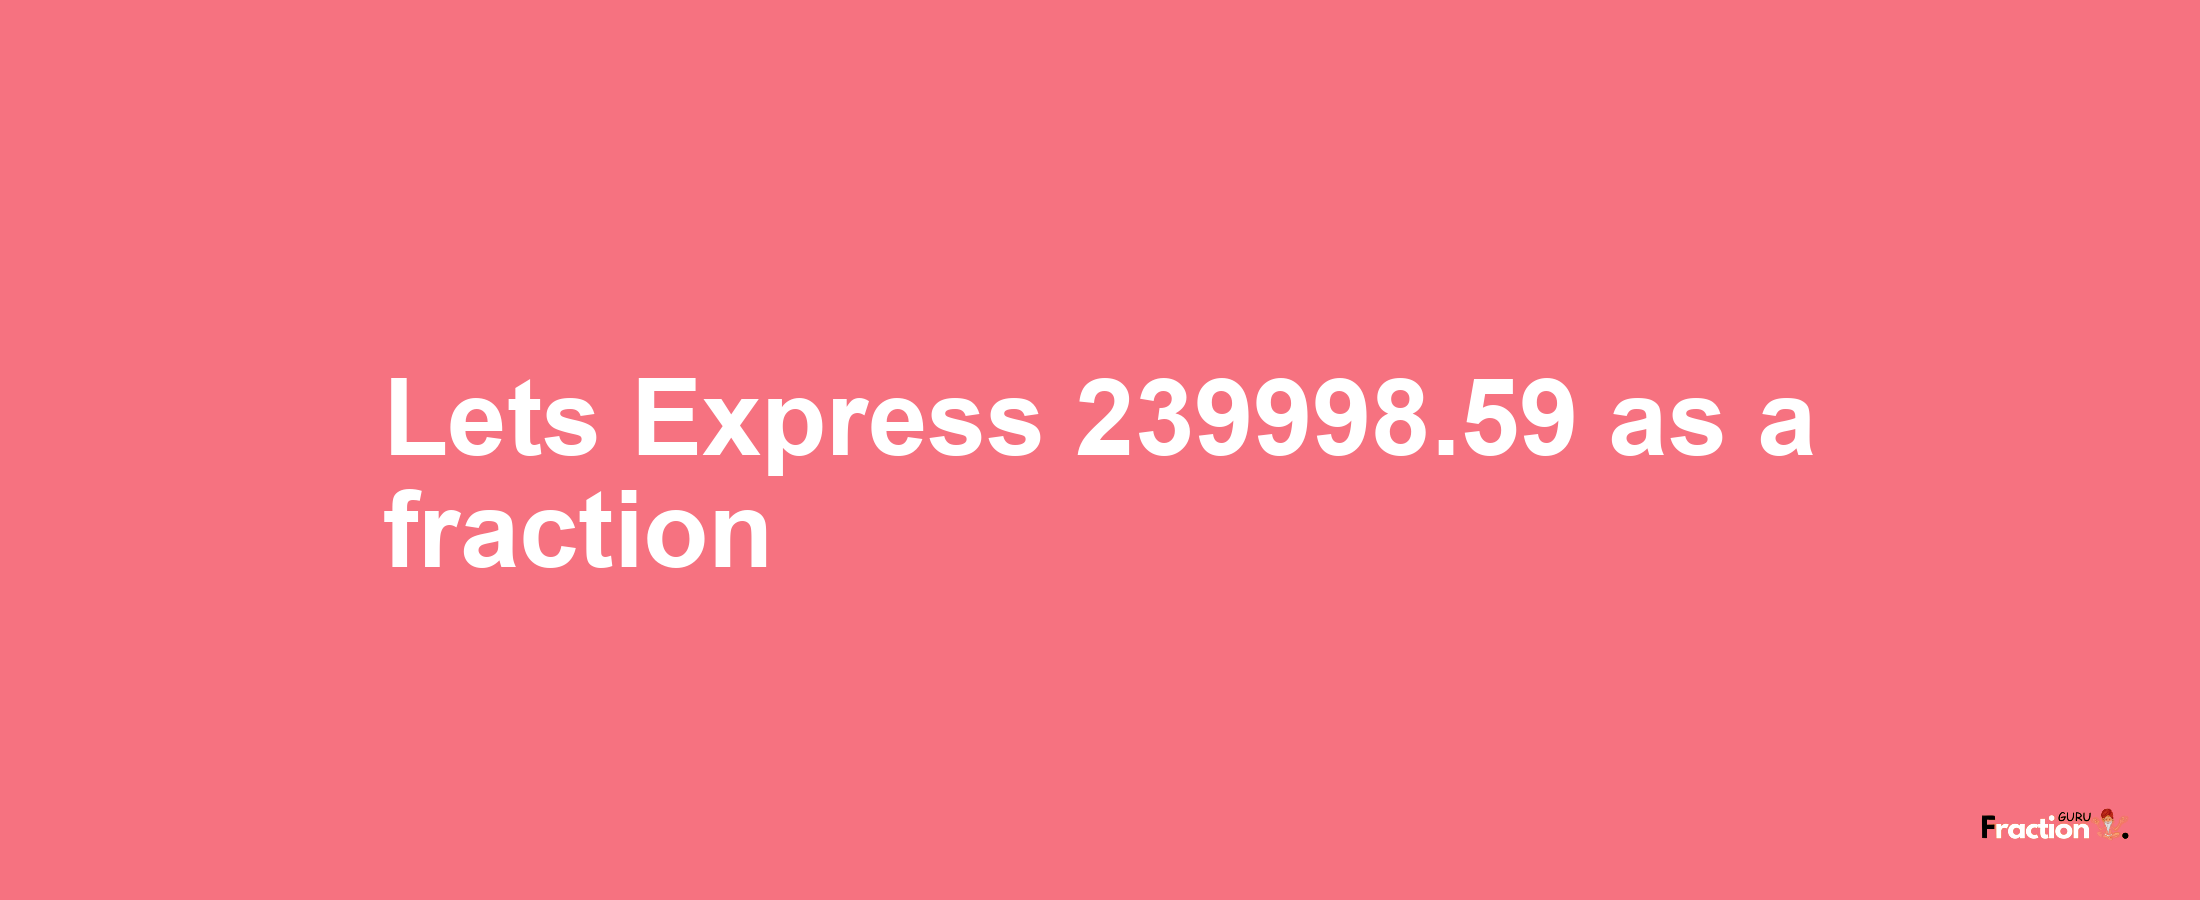 Lets Express 239998.59 as afraction